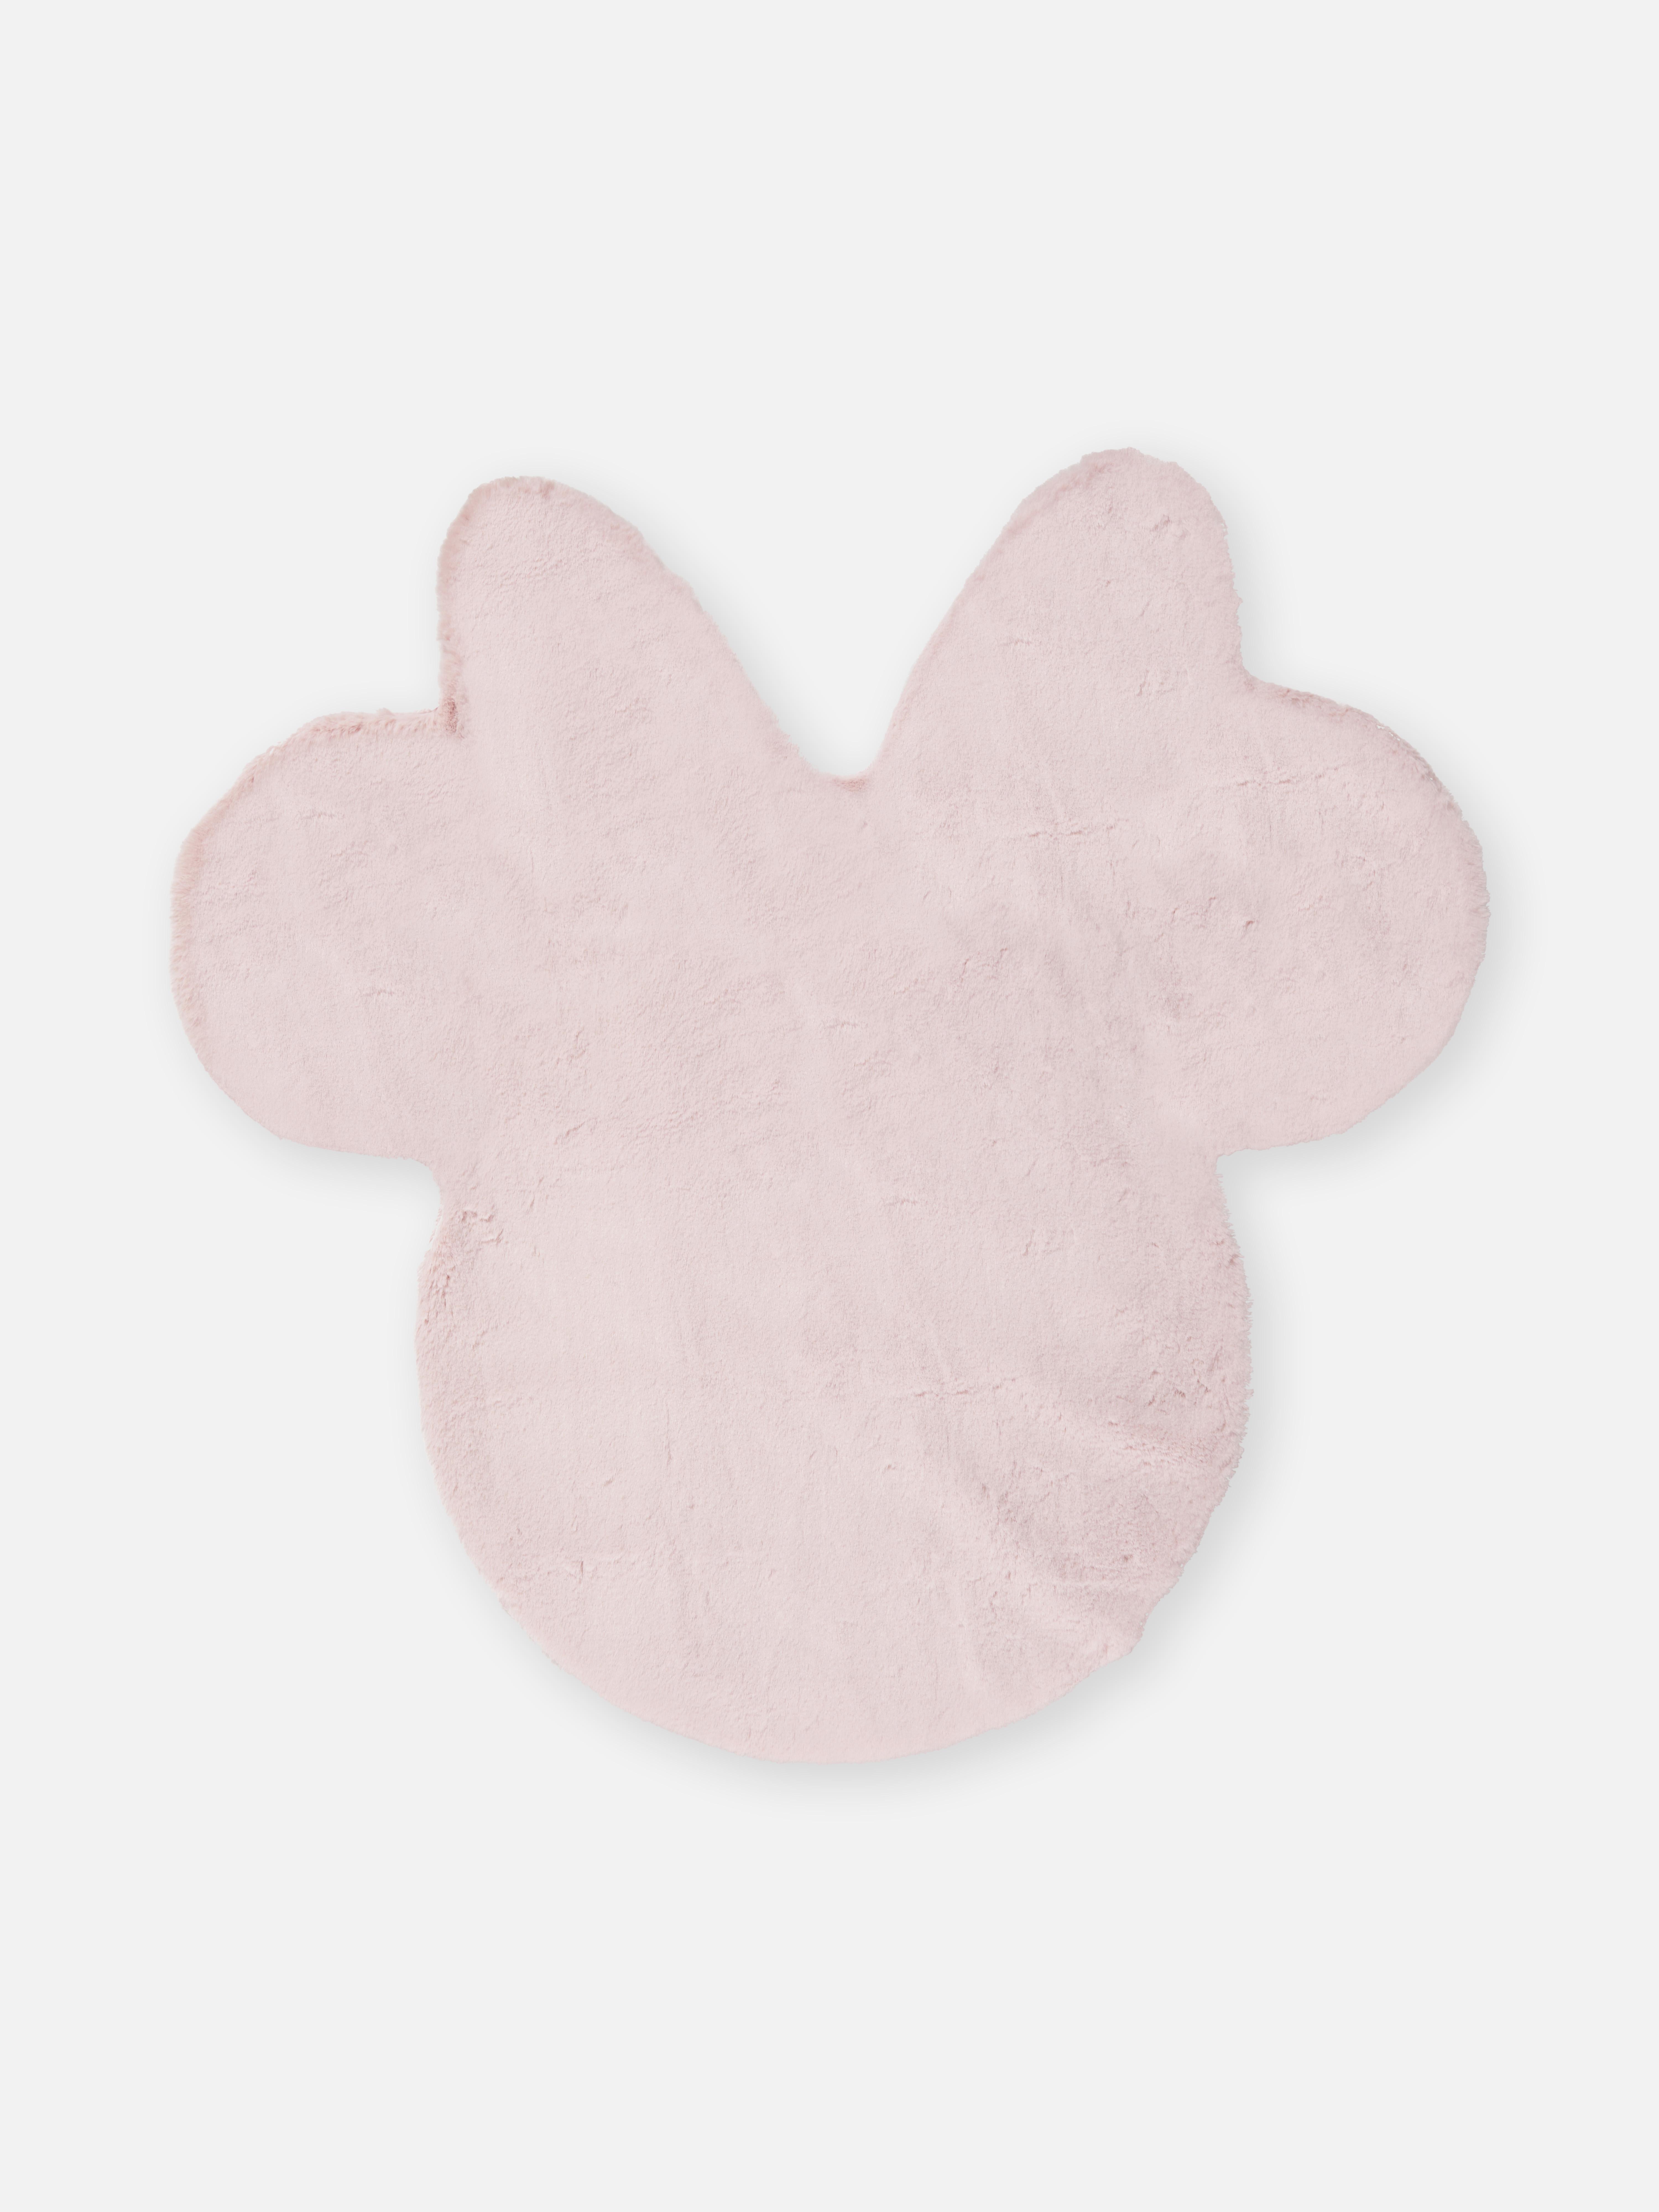 Disney’s Minnie Mouse Shaped Fluffy Rug